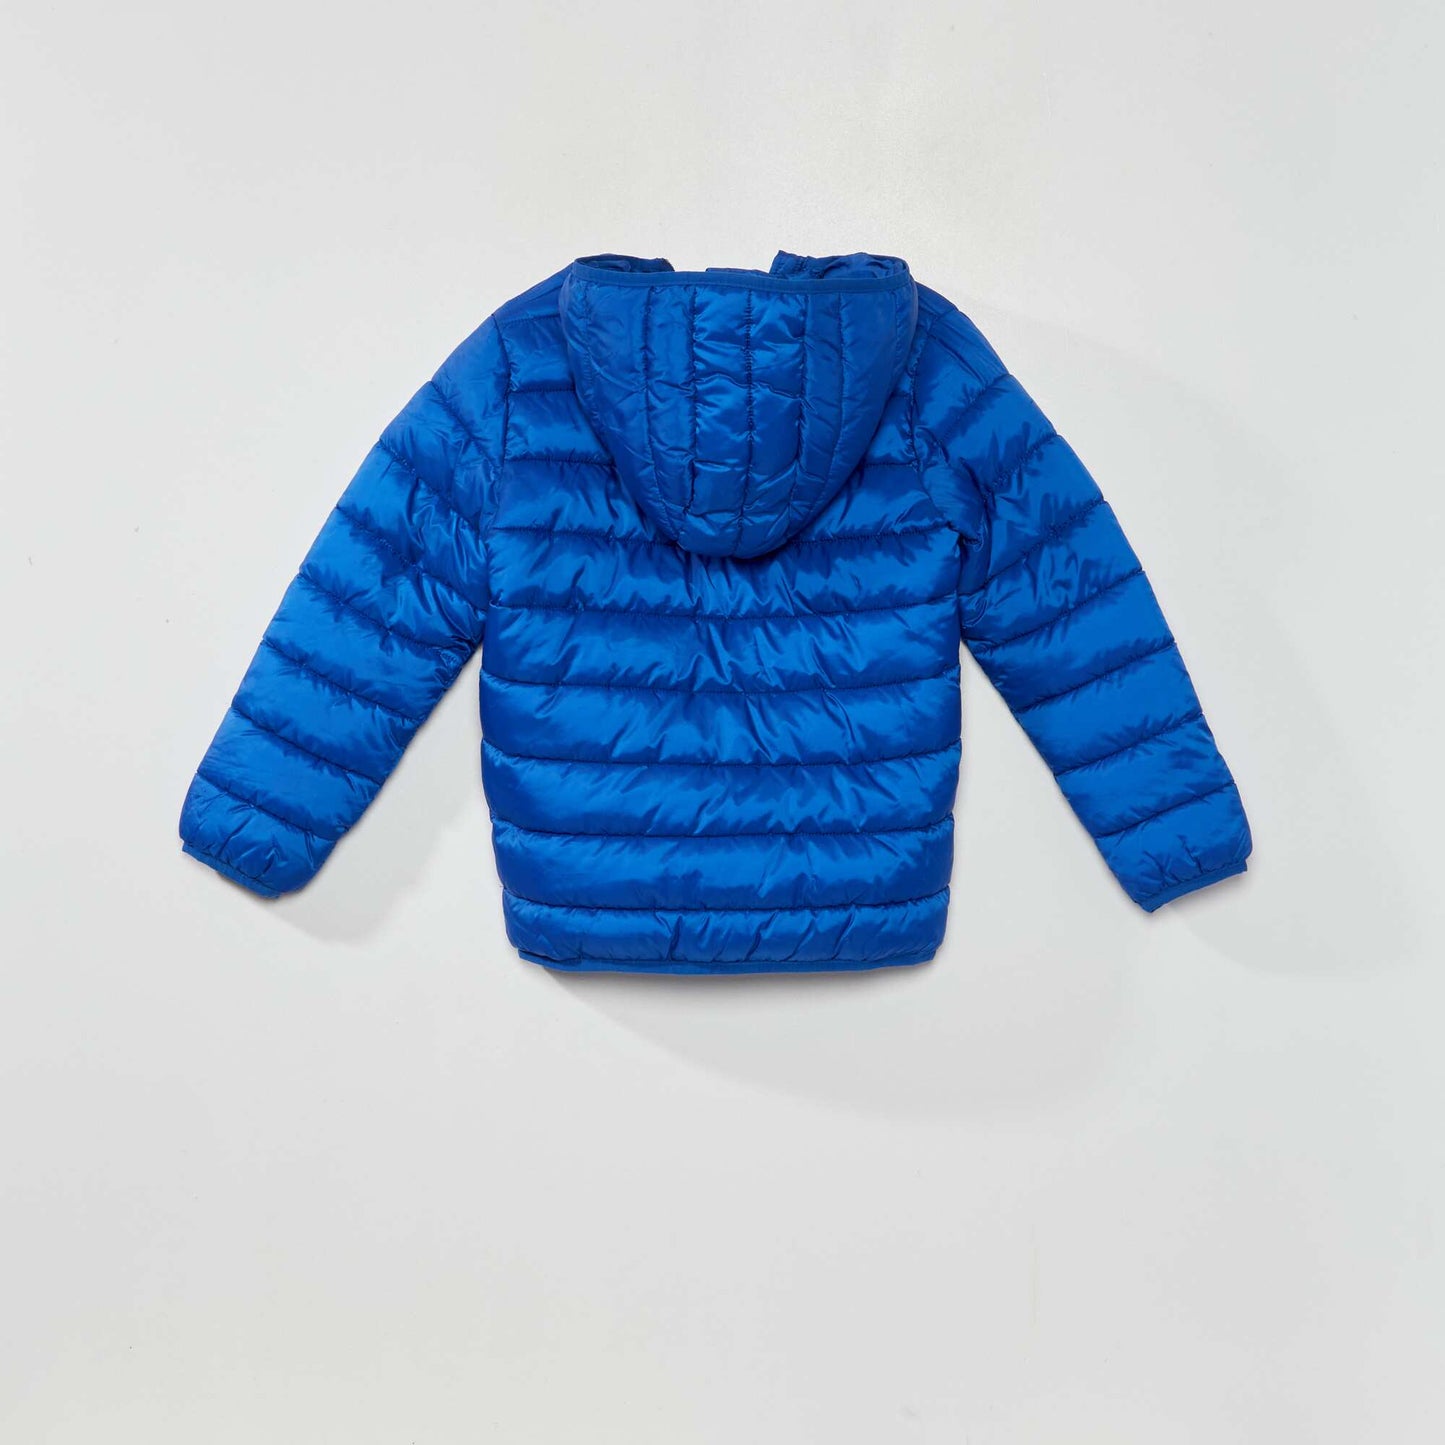 Padded jacket made from recycled bottles BLUE WEB